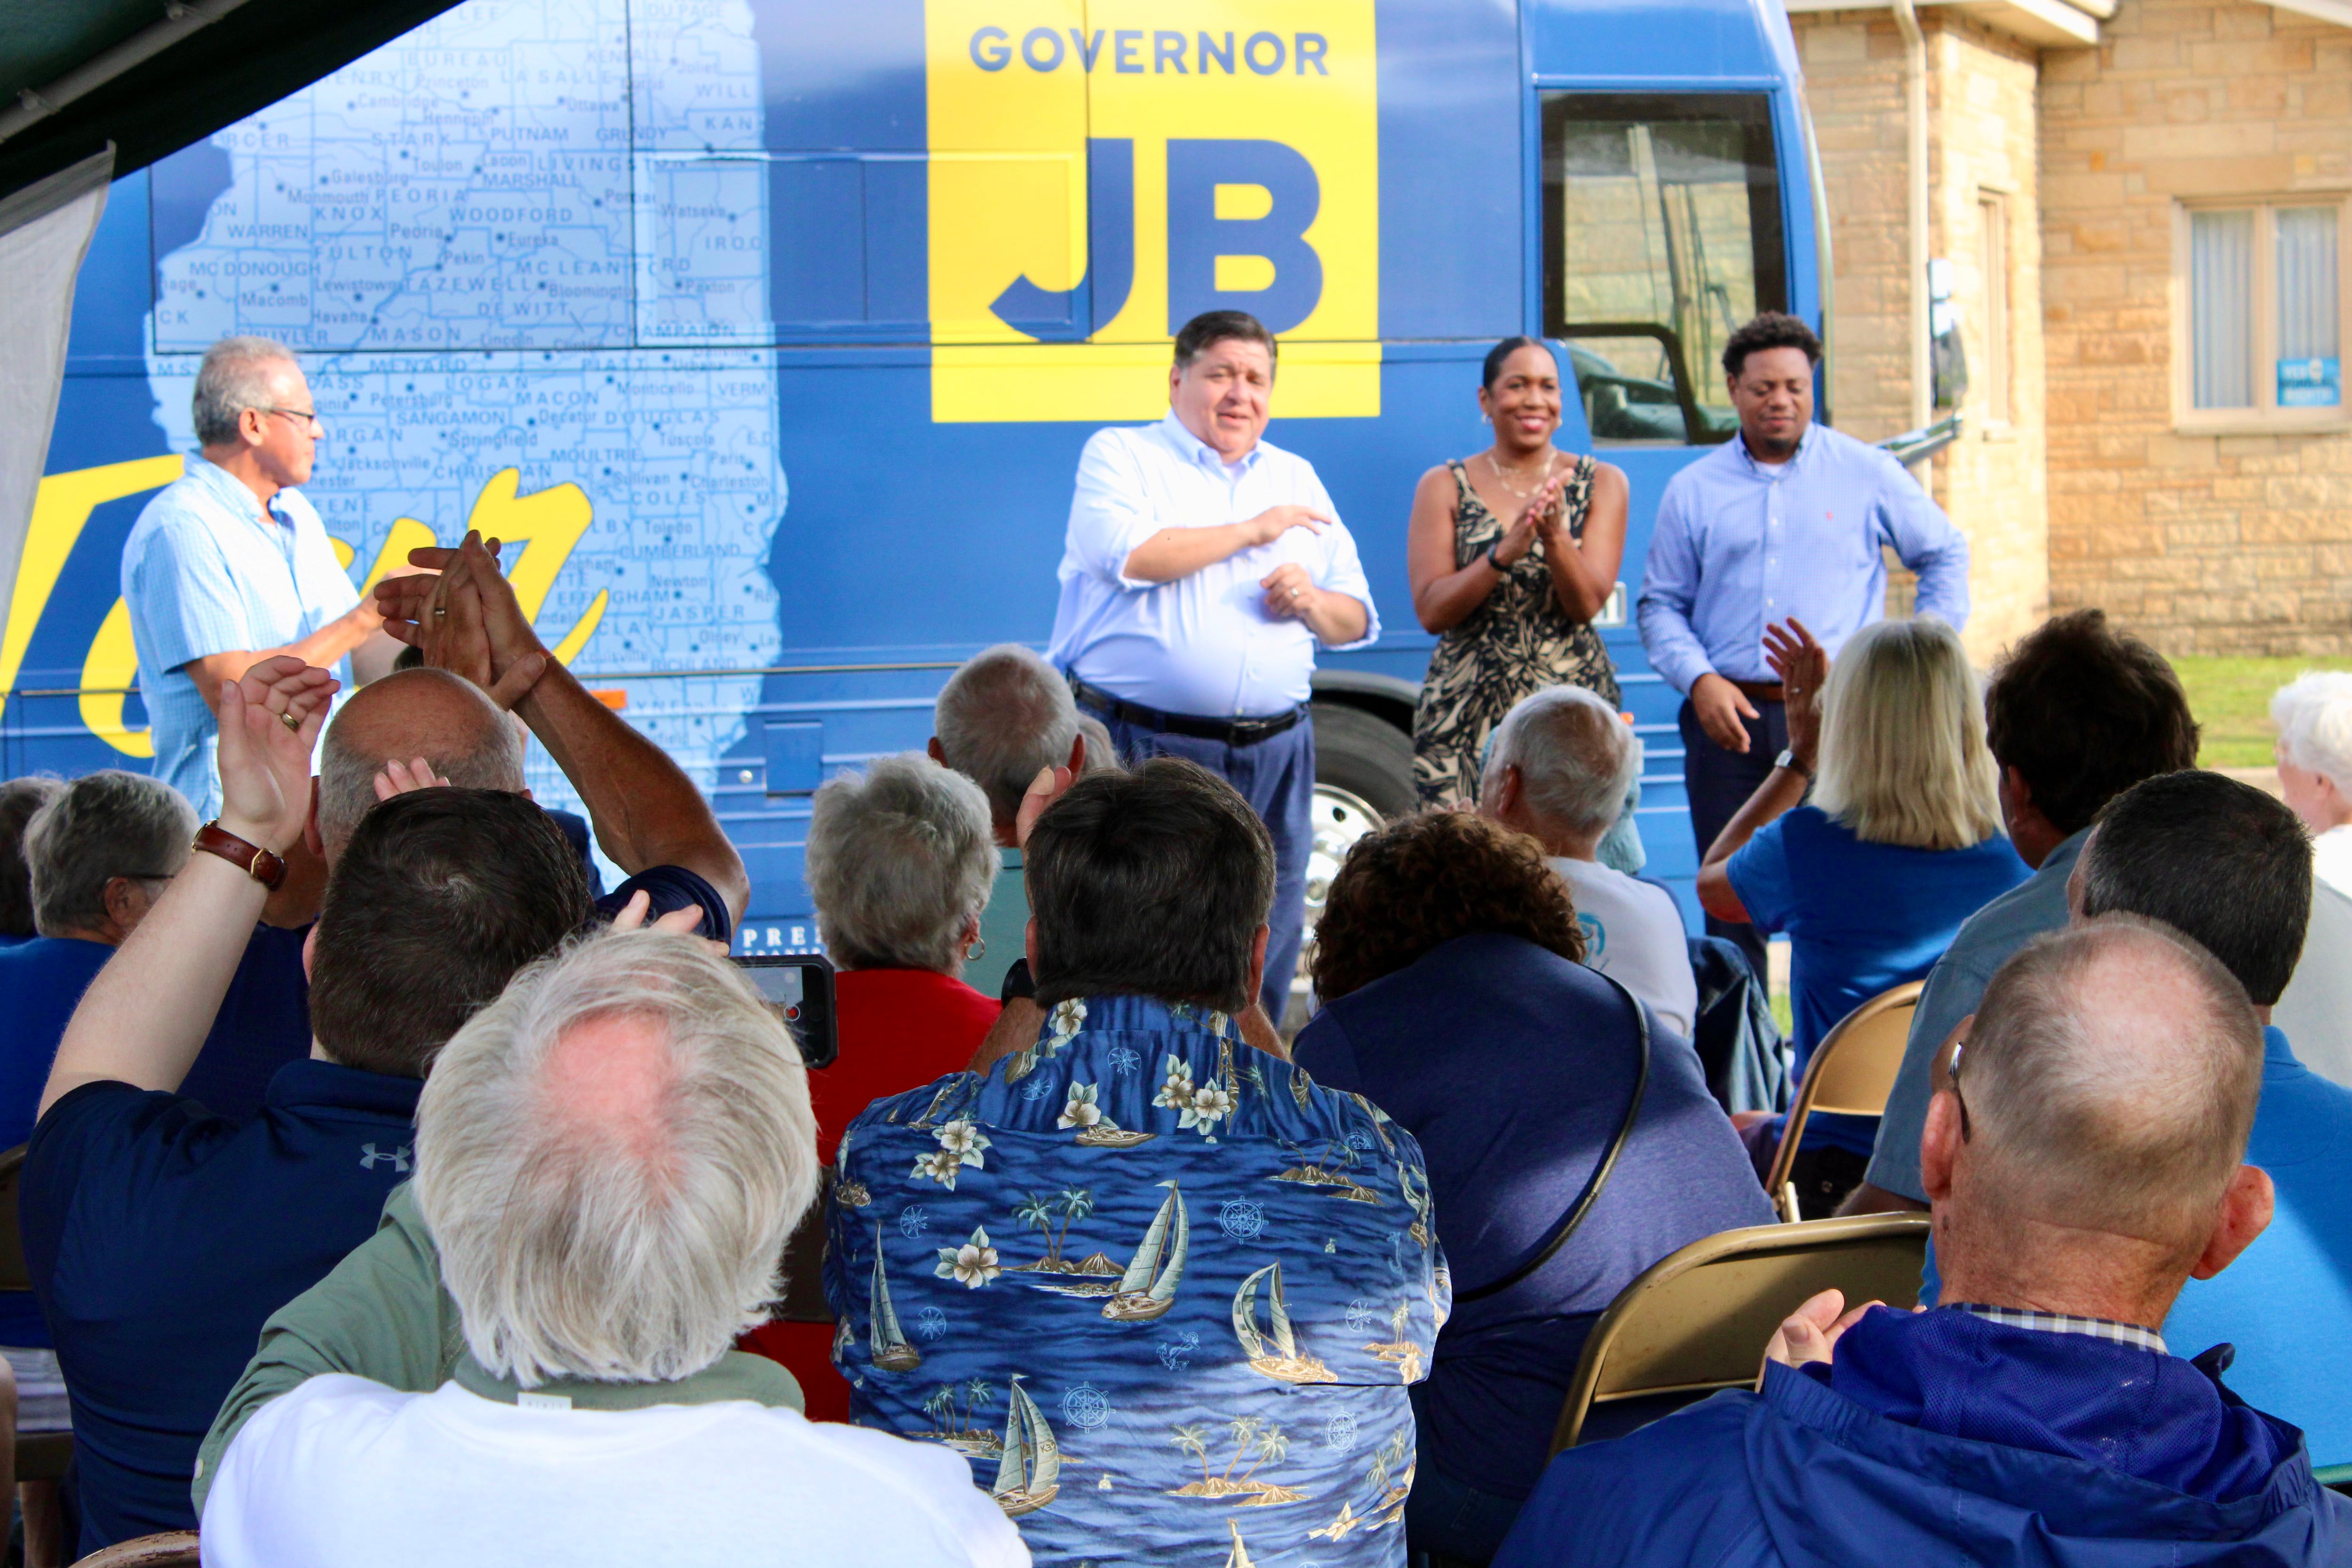 A crowd of about 70 people applauds as Gov. JB Pritzker makes a campaign speech on Sunday in from of his tour bus parked in front of the Whiteside County Democratic Headquarters in Rock Falls. From left: Whiteside County Democratic Chairman Fidencio Campos, Pritzker, Lt. Gov. Juliana Stratton and her husband, Bryan Echols.